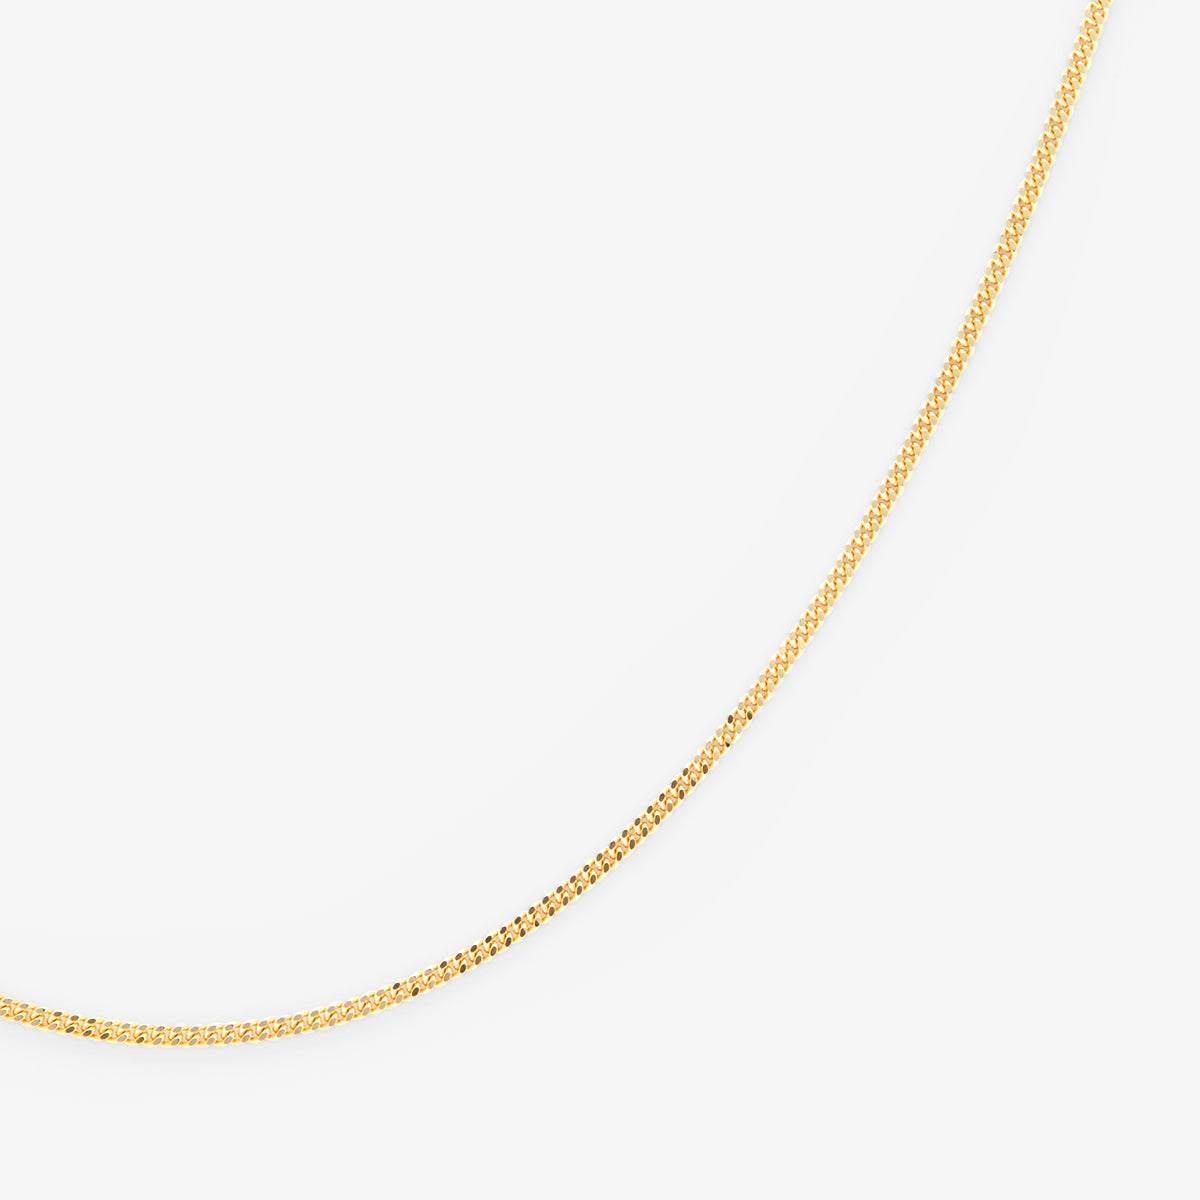 16" Ribbon Chain Necklace